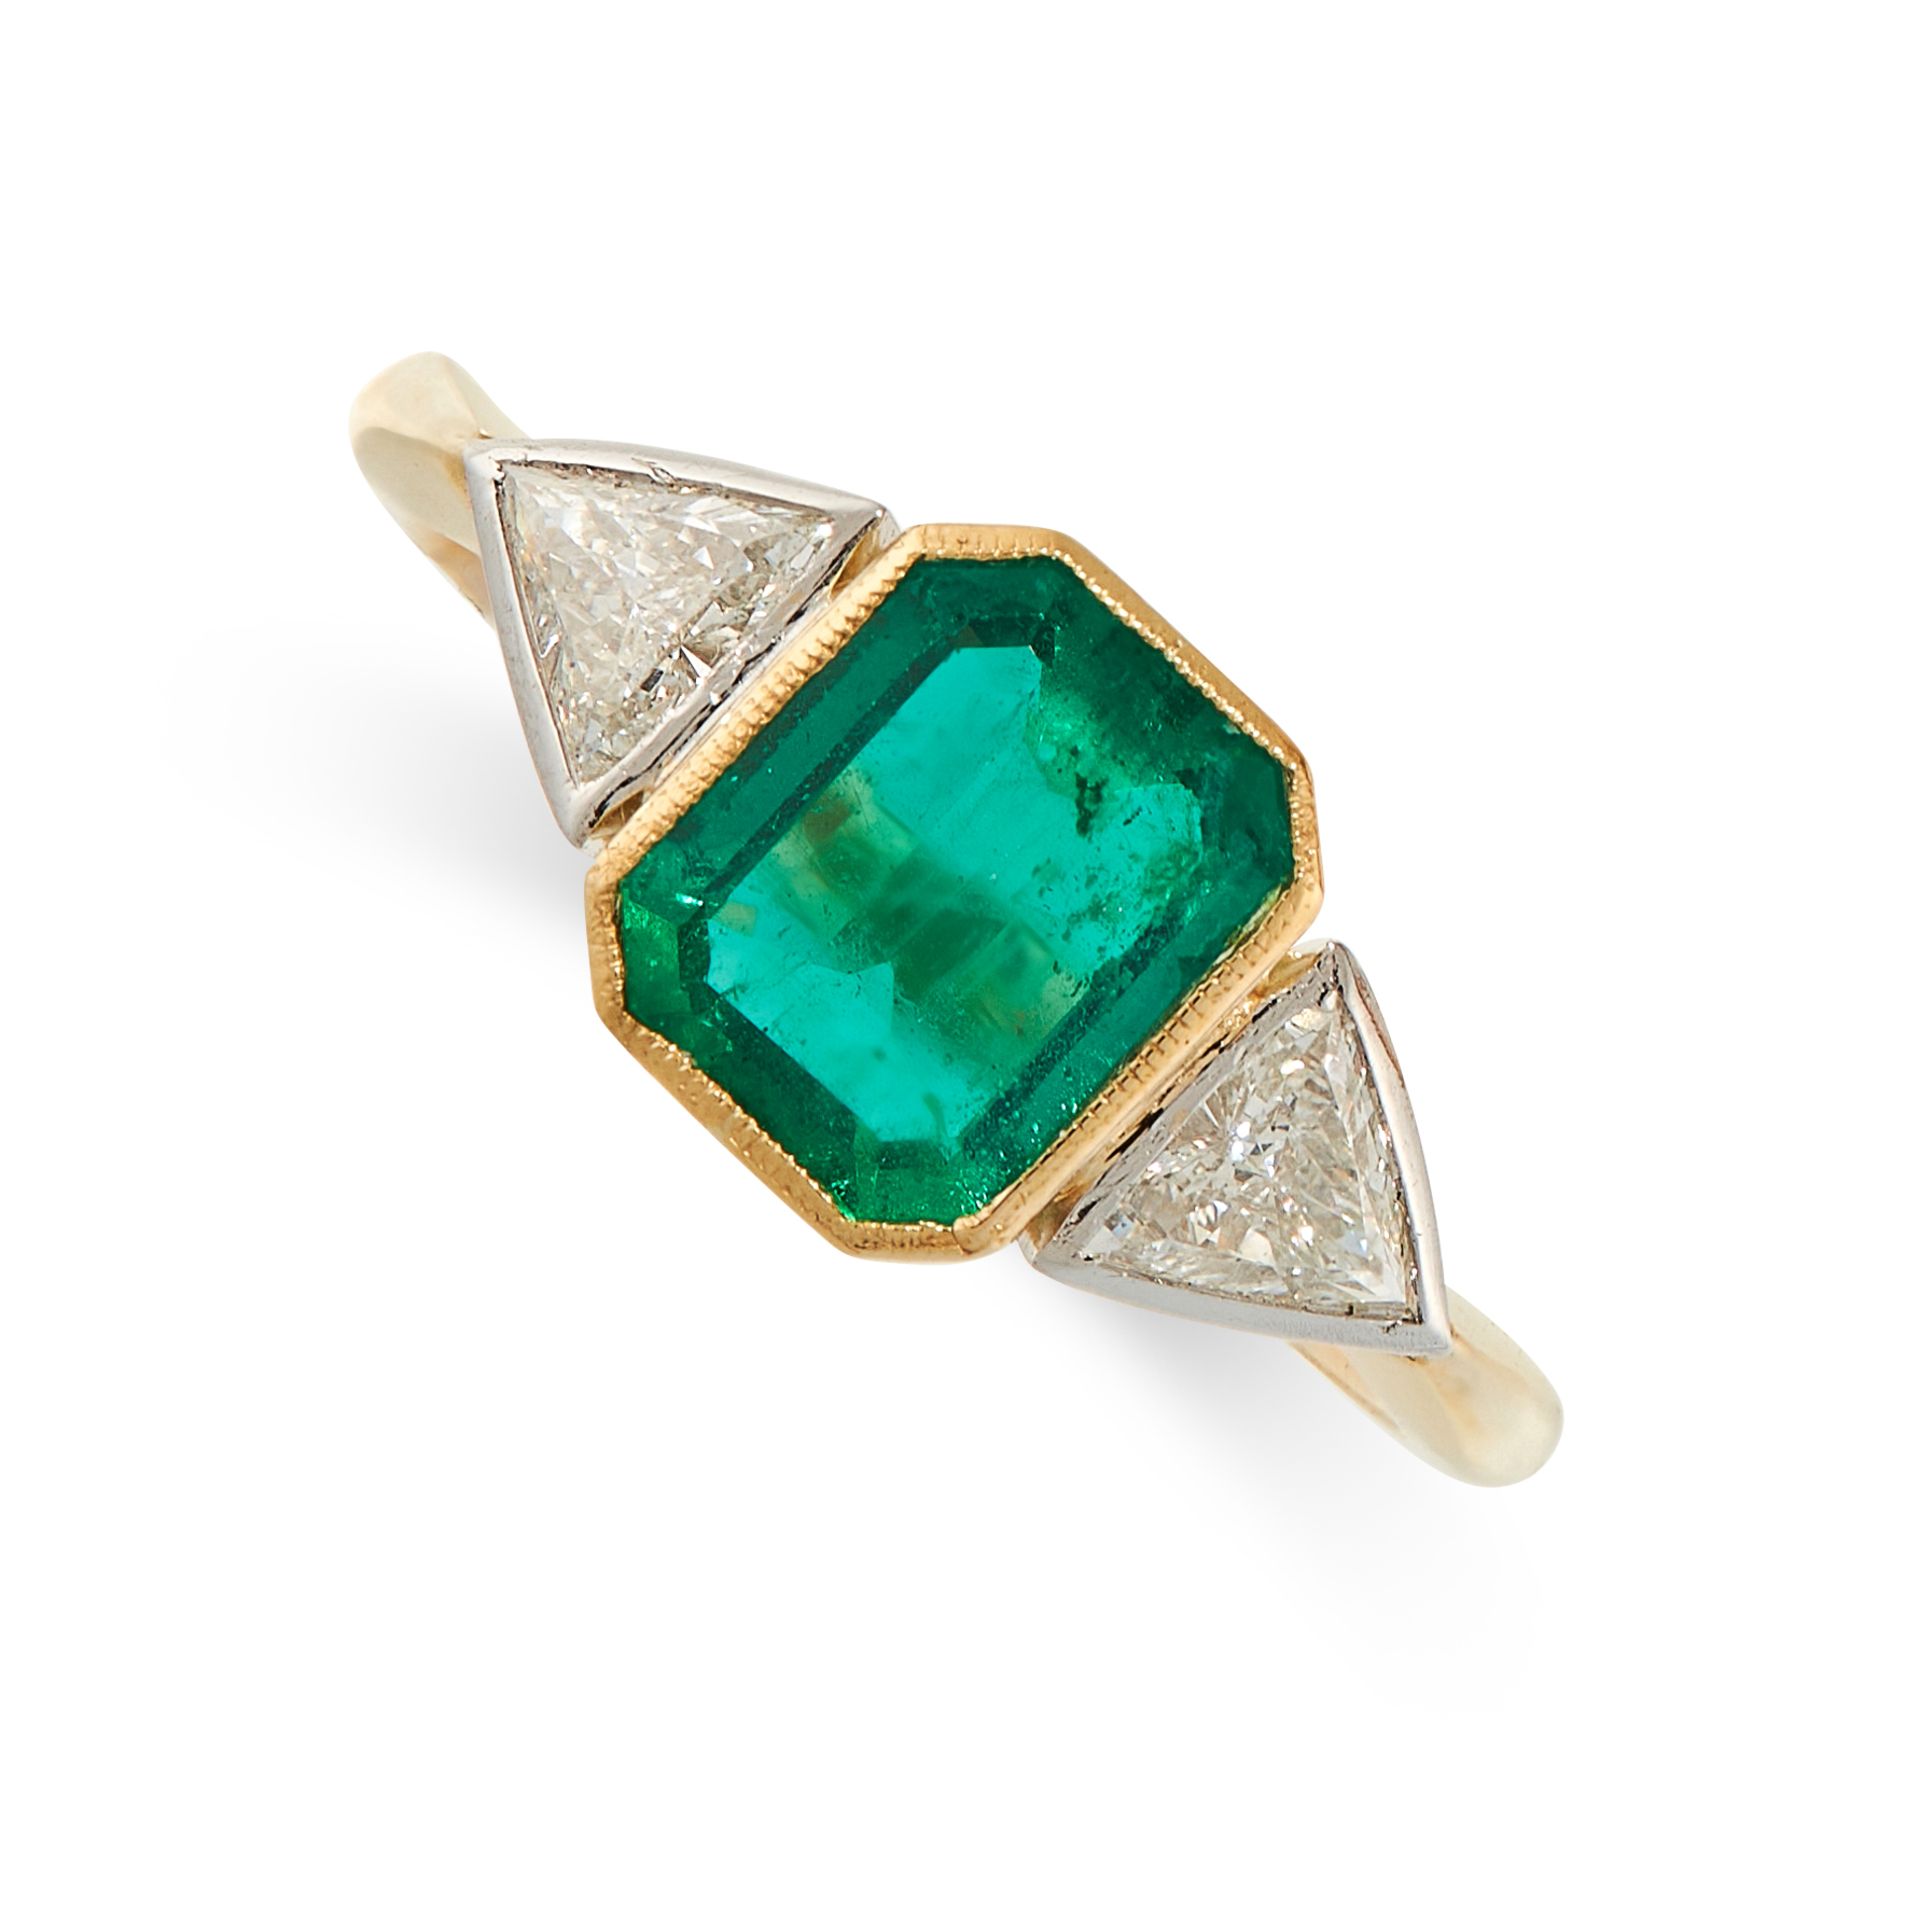 AN EMERALD AND DIAMOND DRESS RING in 18ct yellow gold, set with an emerald cut emerald of 1.45